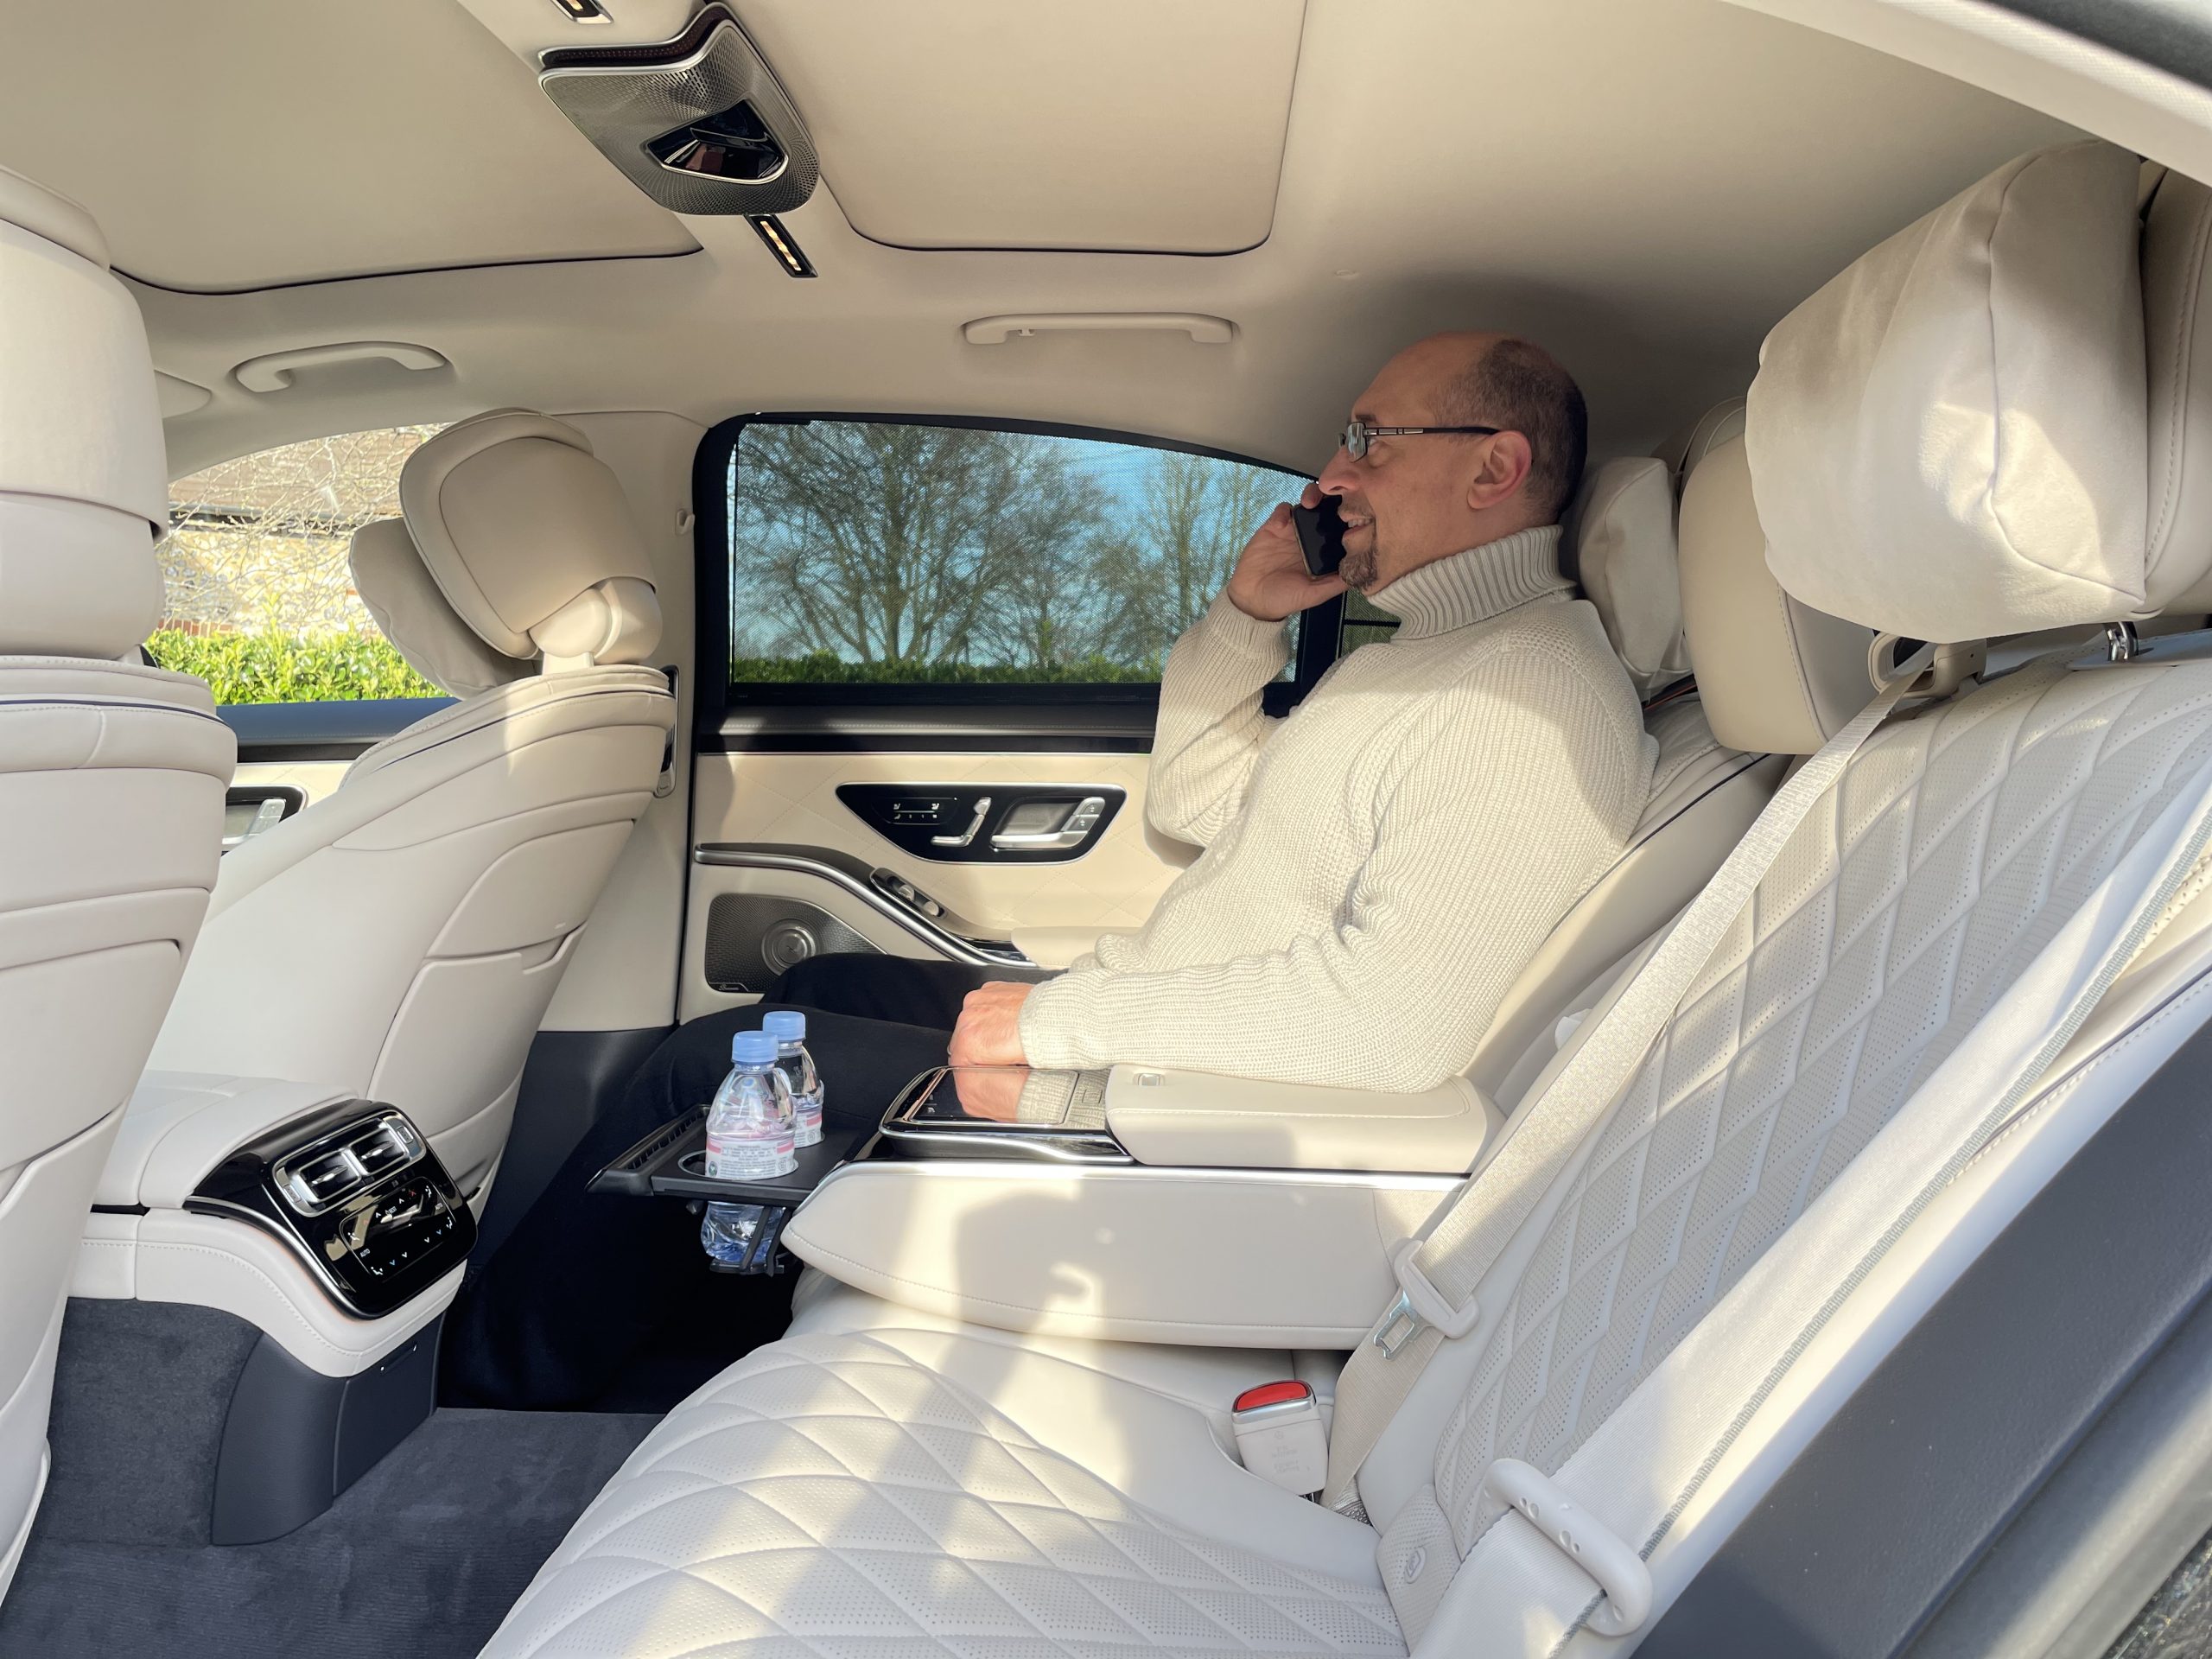 What Should I Expect From a VIP Chauffeur Service?